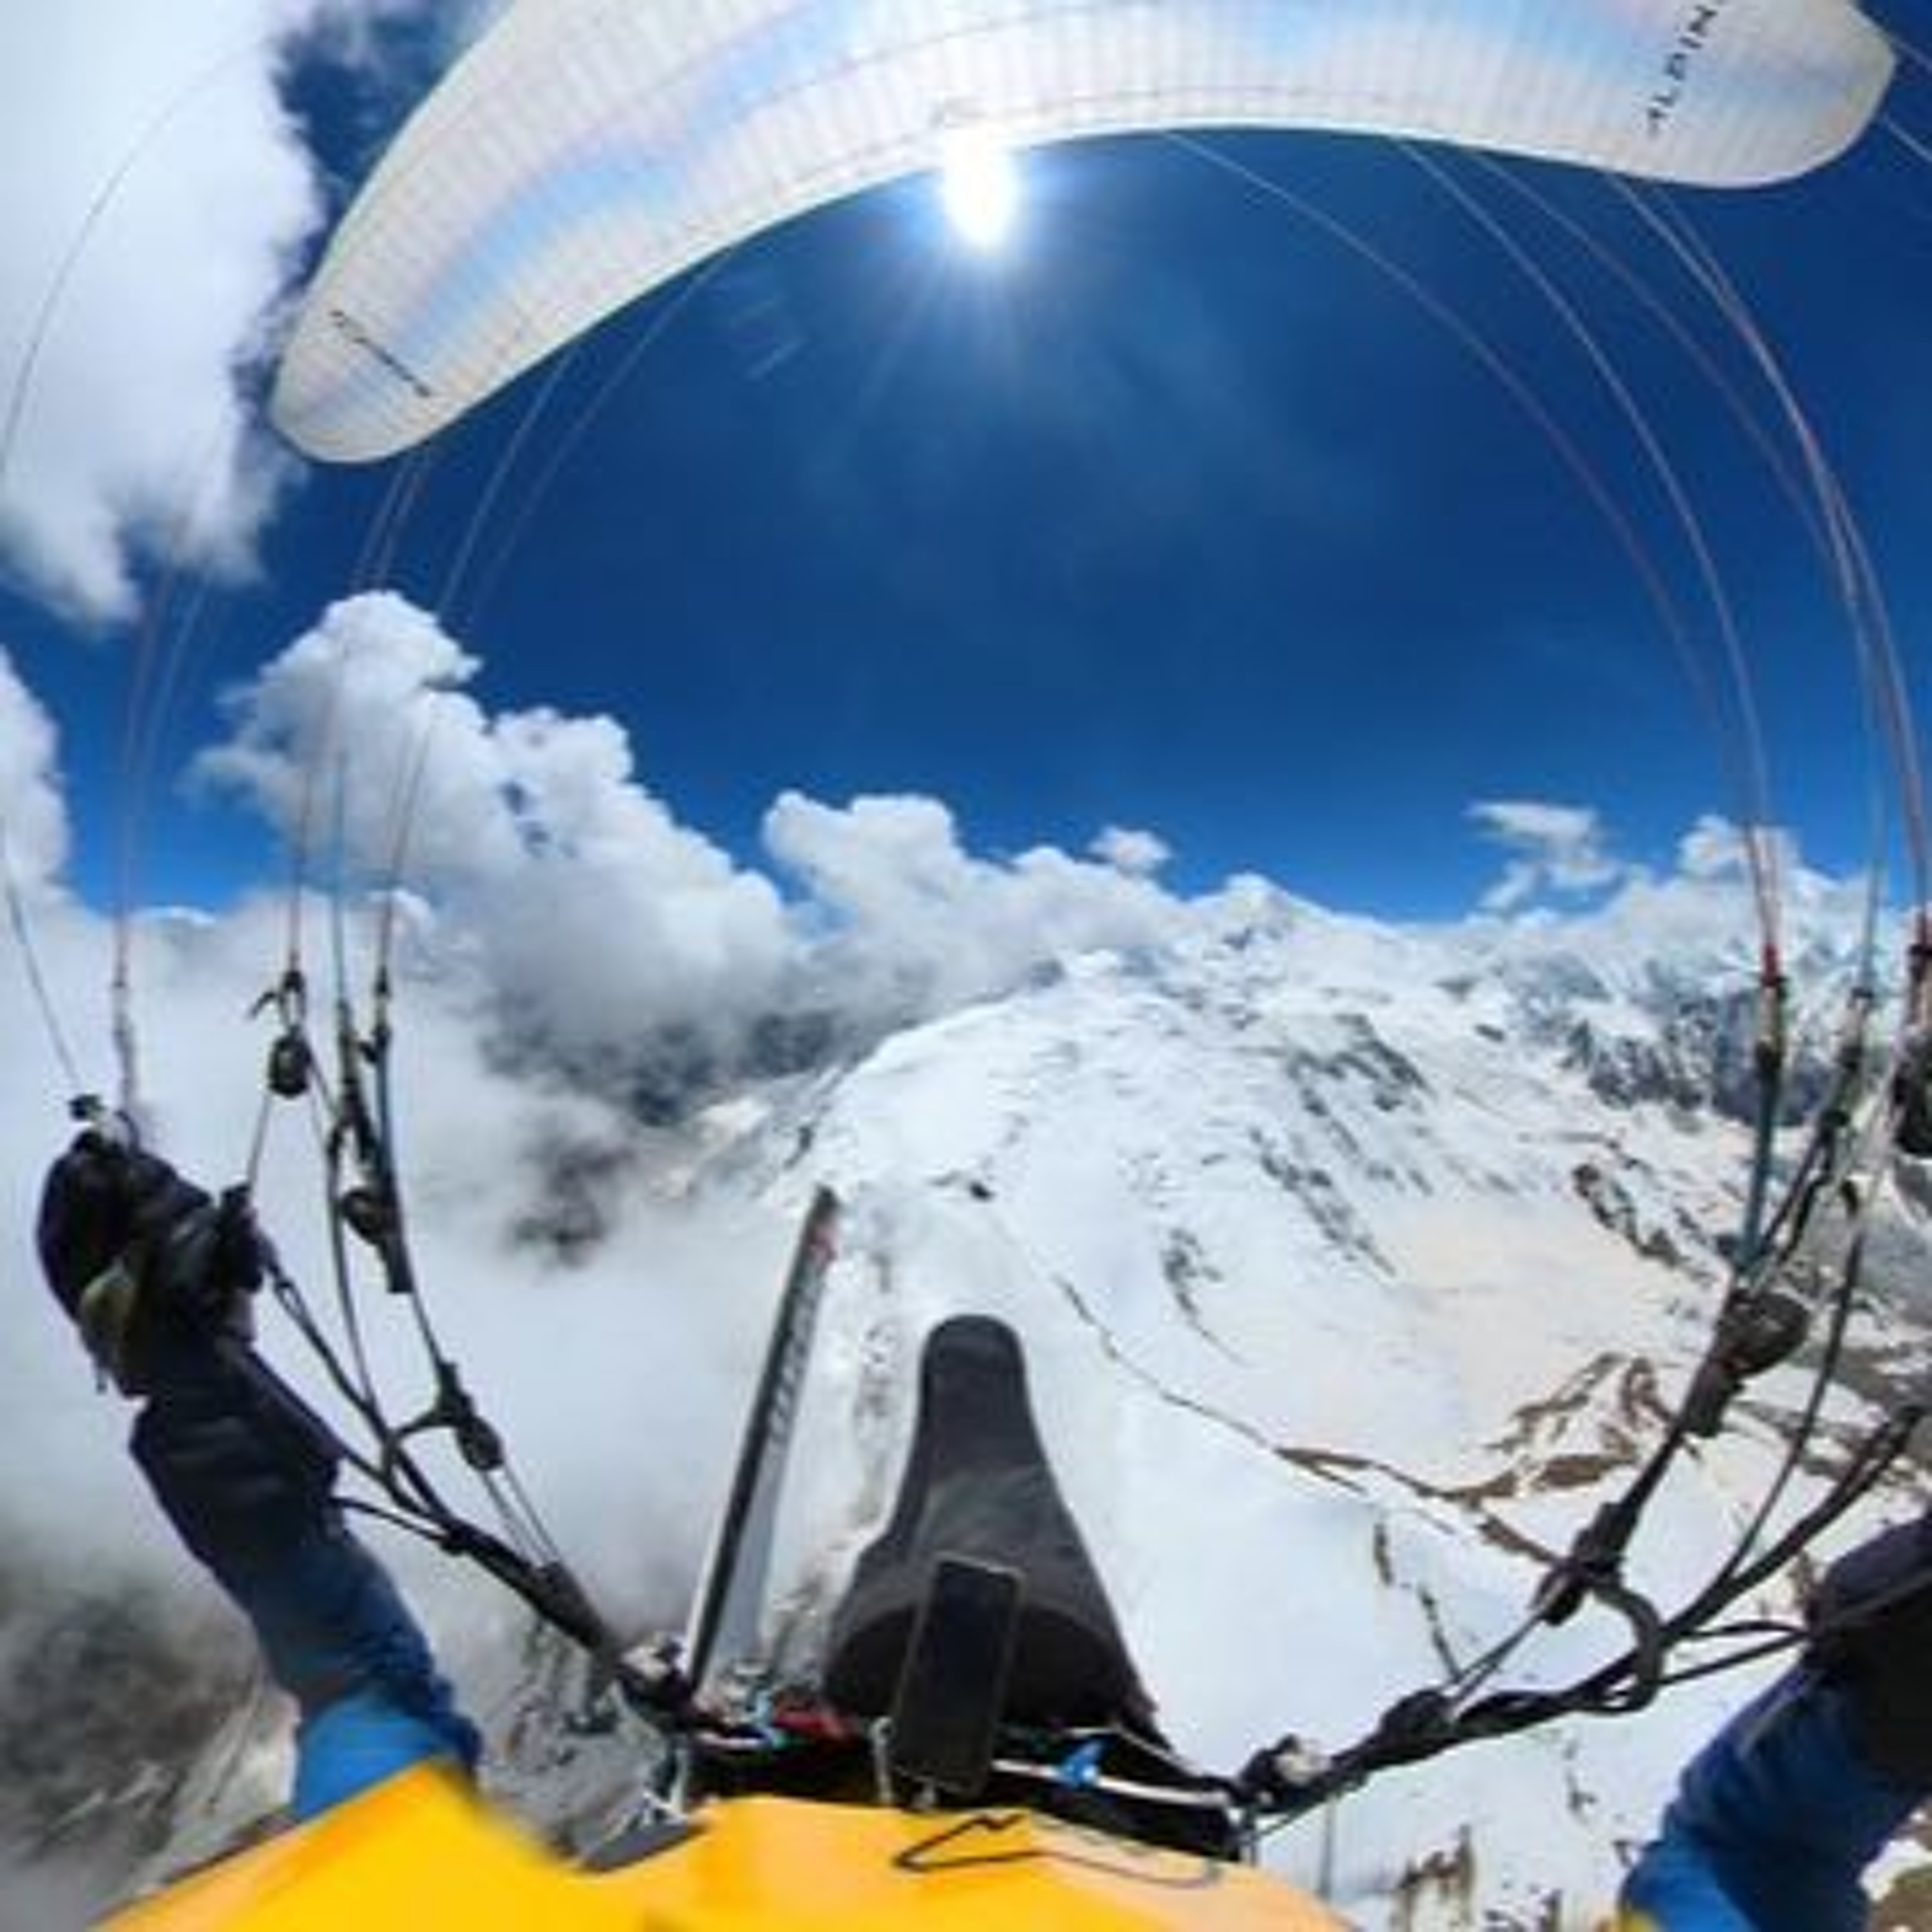 Fabian Buhl and Will Sim: New Frontiers of Paragliding and Alpinism